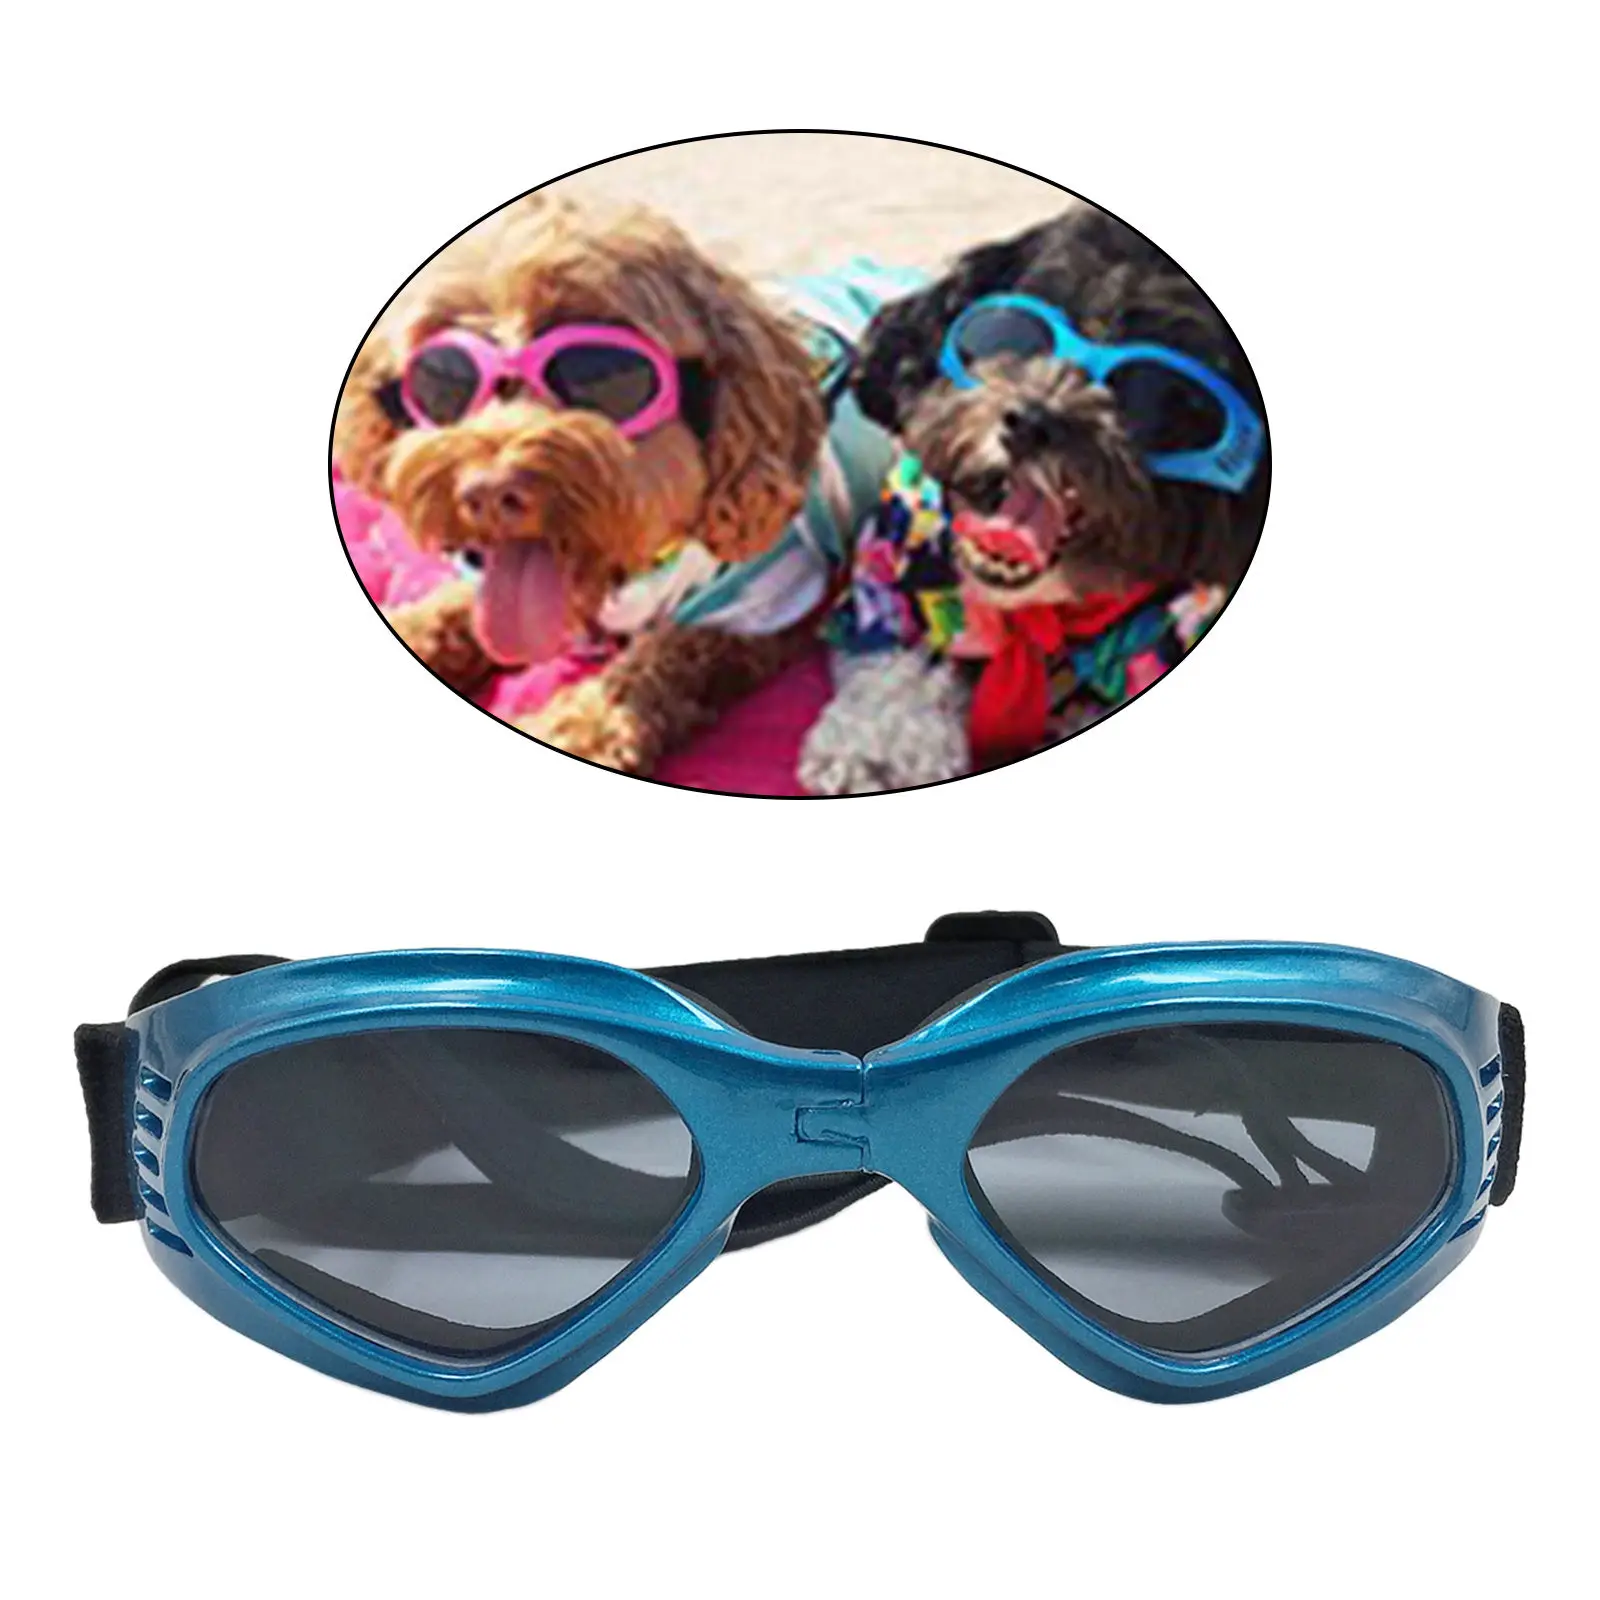 Dog Sunglasses Eye Wear with Adjustable Strap Cool Goggles Dust Protection Foldable Anti-Breaking for Travel Skiing Medium Dog